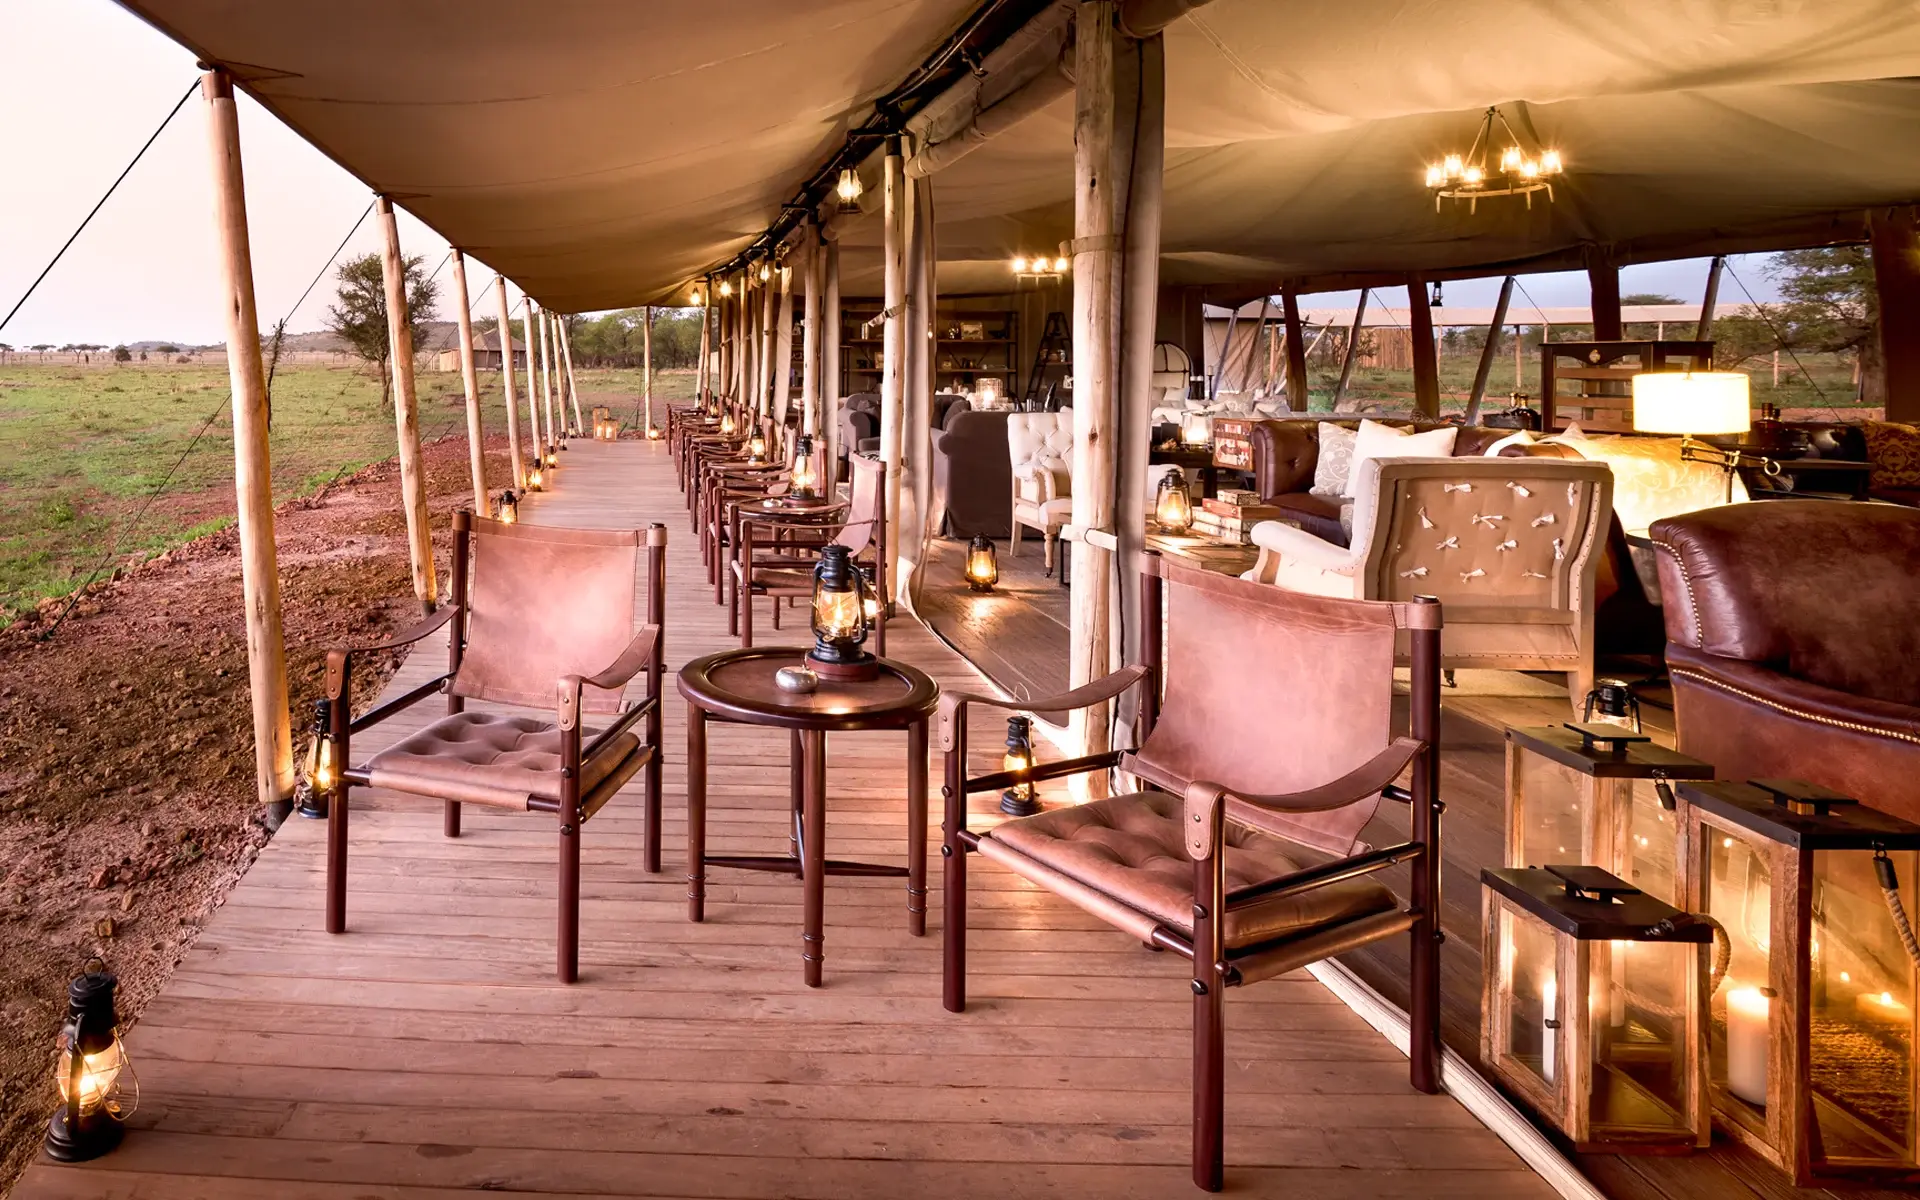 Lounge with the views of the Serengeti National Park